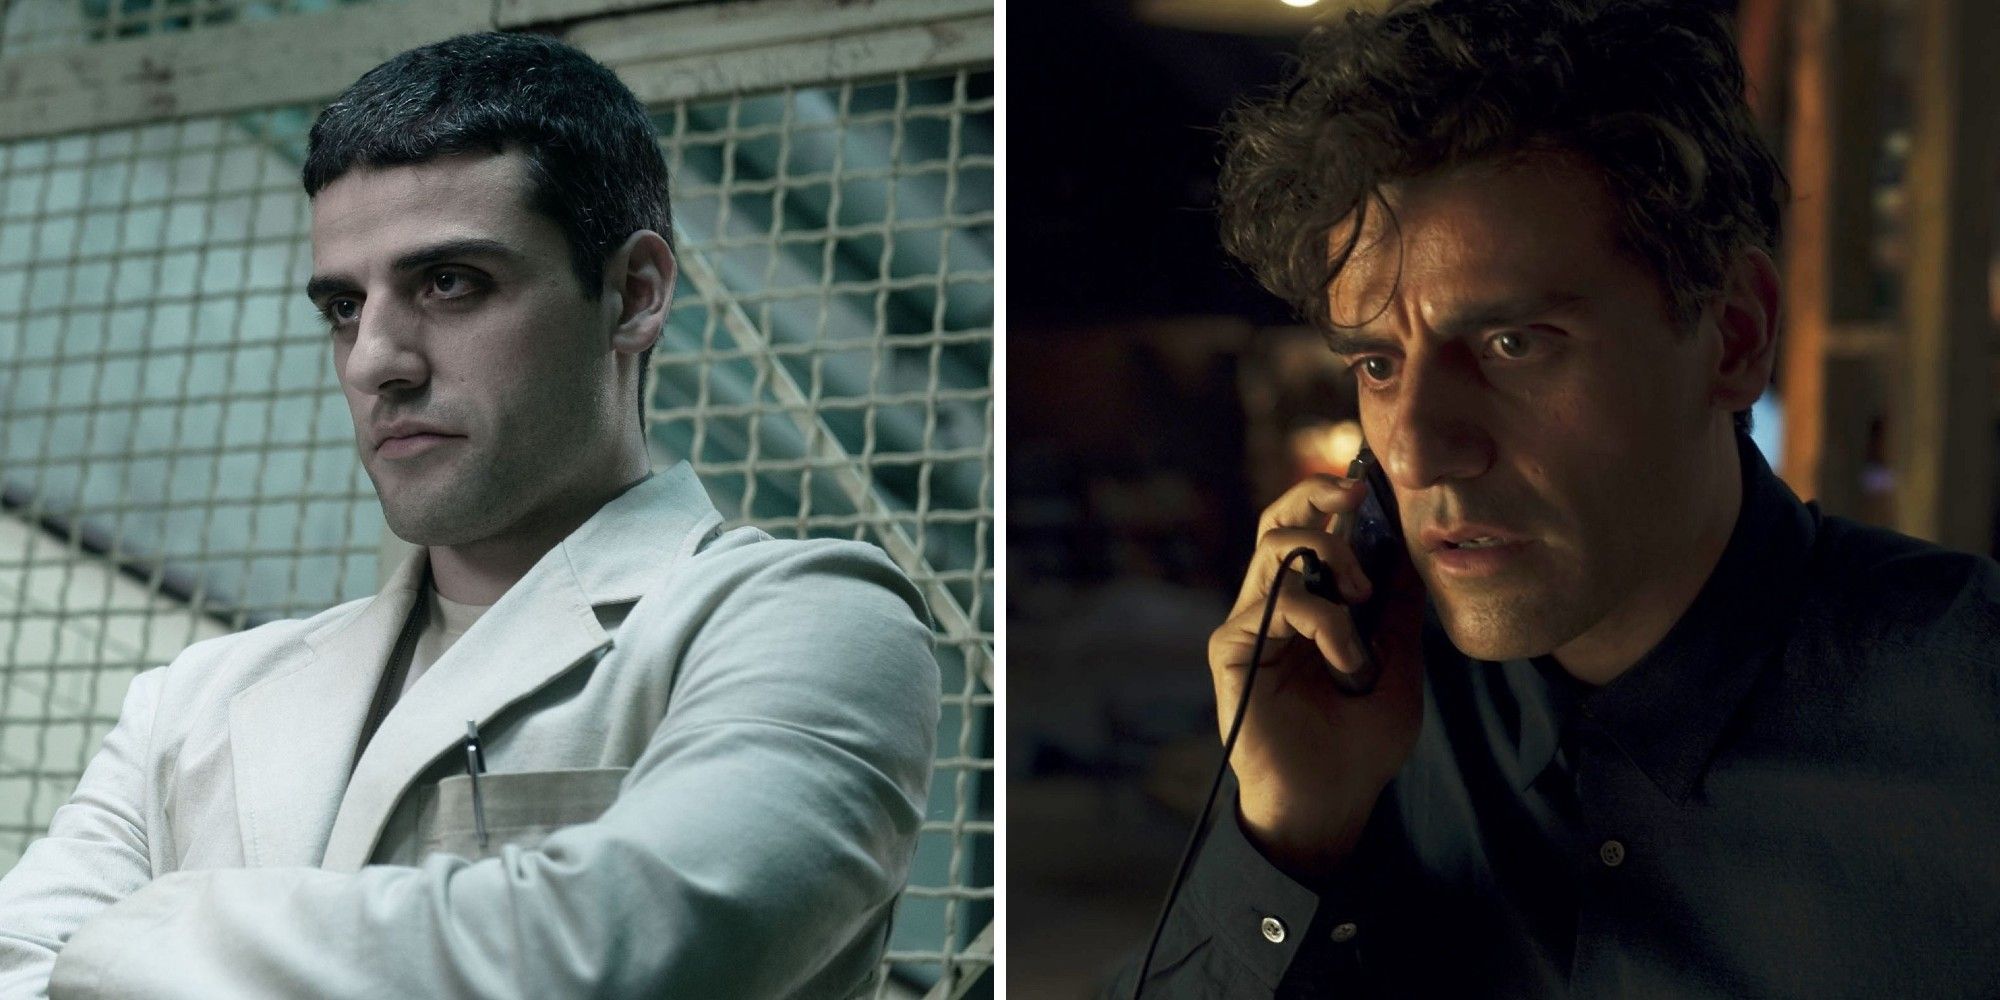 Oscar Isaac in Sucker Punch and Moon Knight